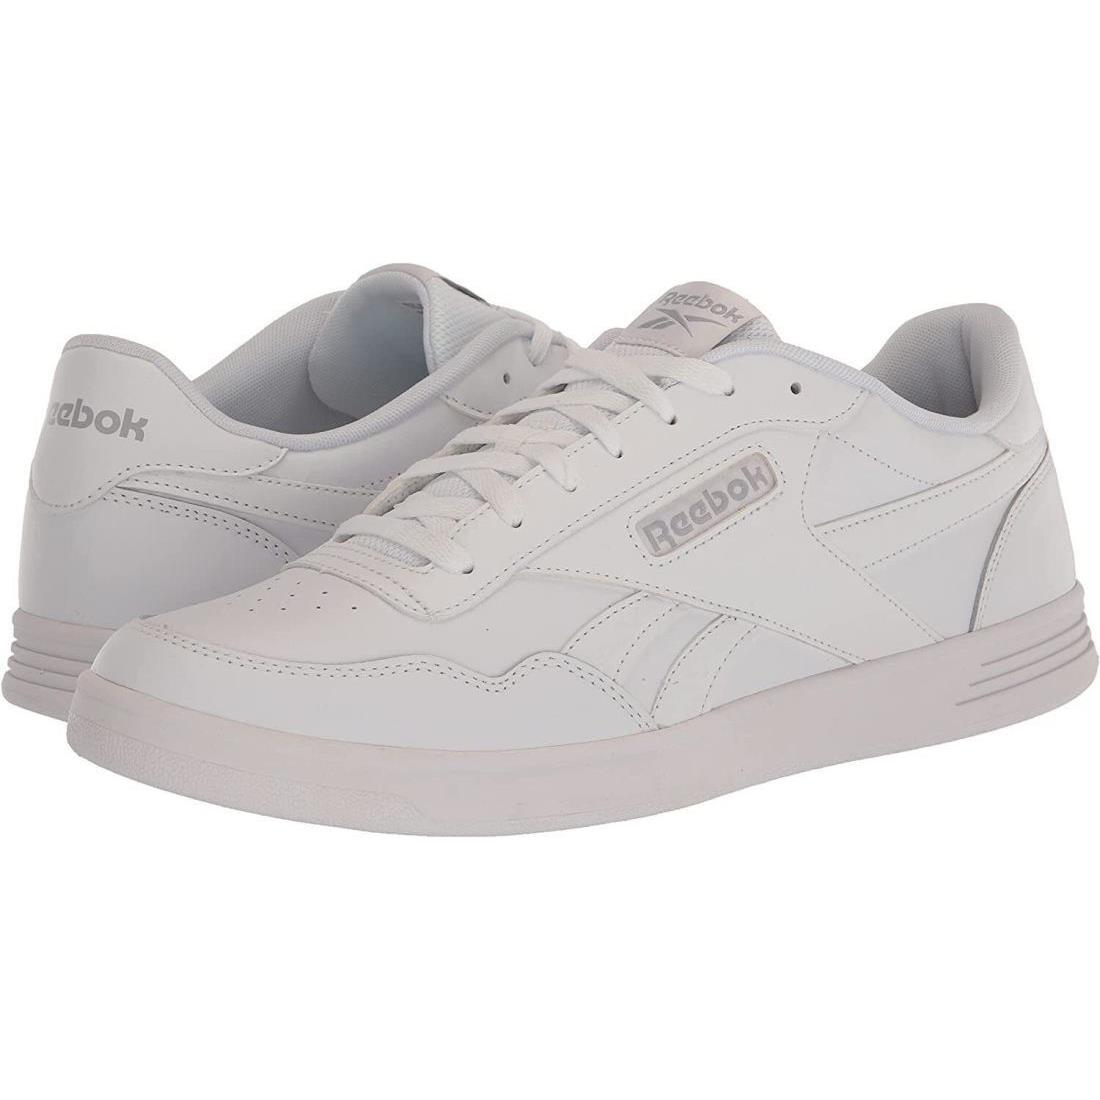 Unisex-adult Reebok Court Advance Sneaker GZ9620 Color White/cold Grey